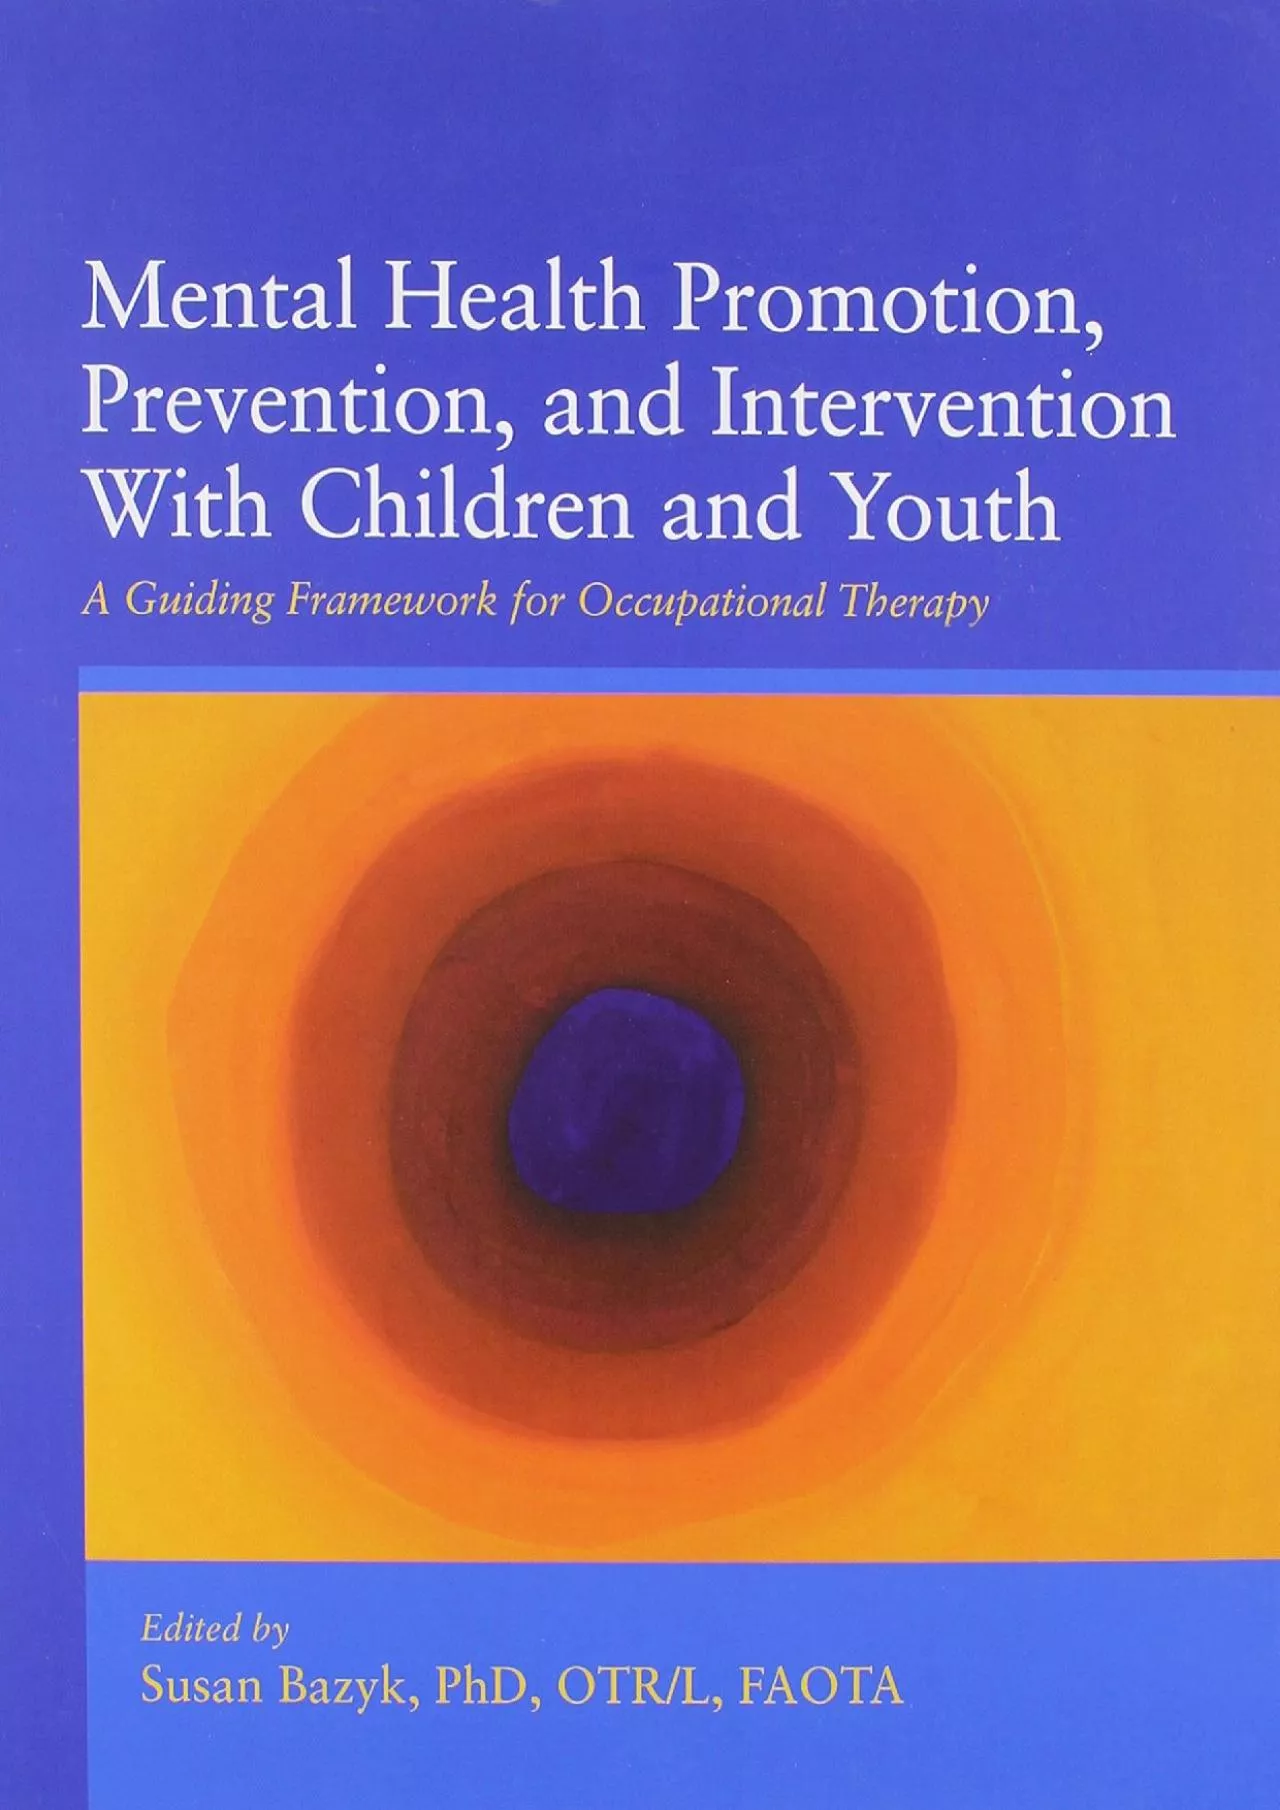 (DOWNLOAD)-Mental Health Promotion, Prevention, and Intervention With Children and Youth: